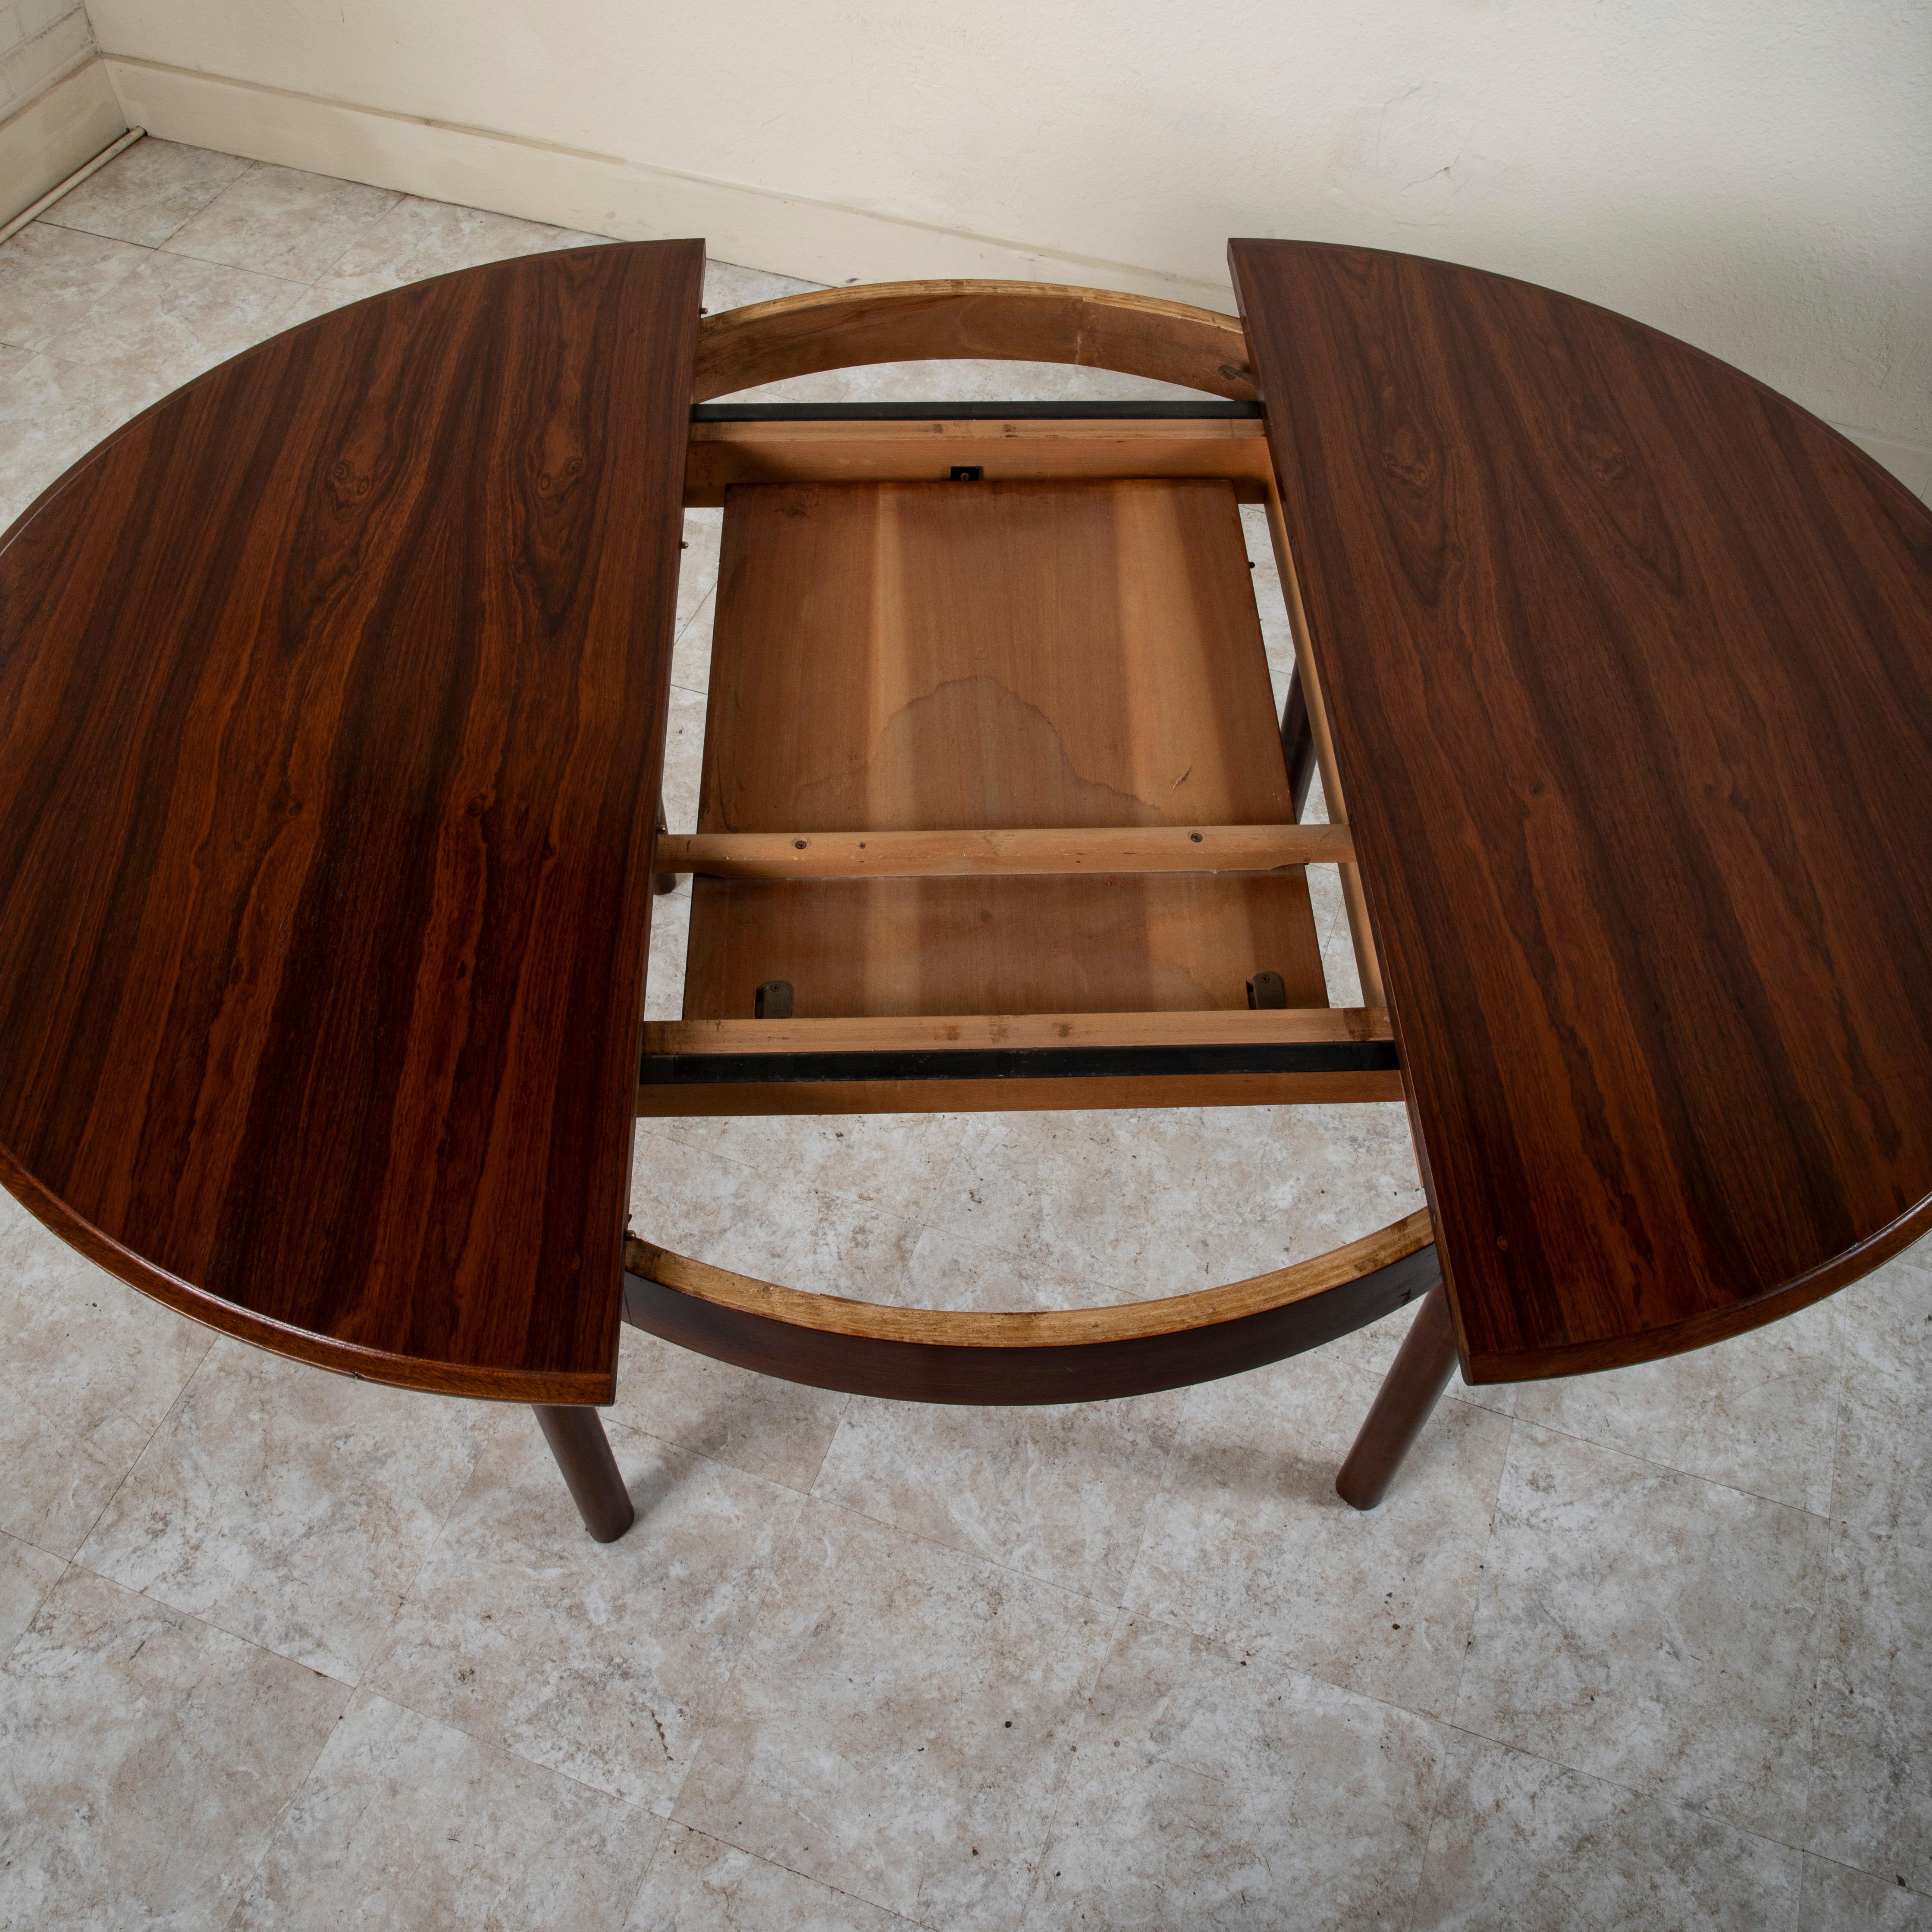 Mid-20th Century Danish Rosewood Round to Oval Dining Table, Collapsible Leaf For Sale 5